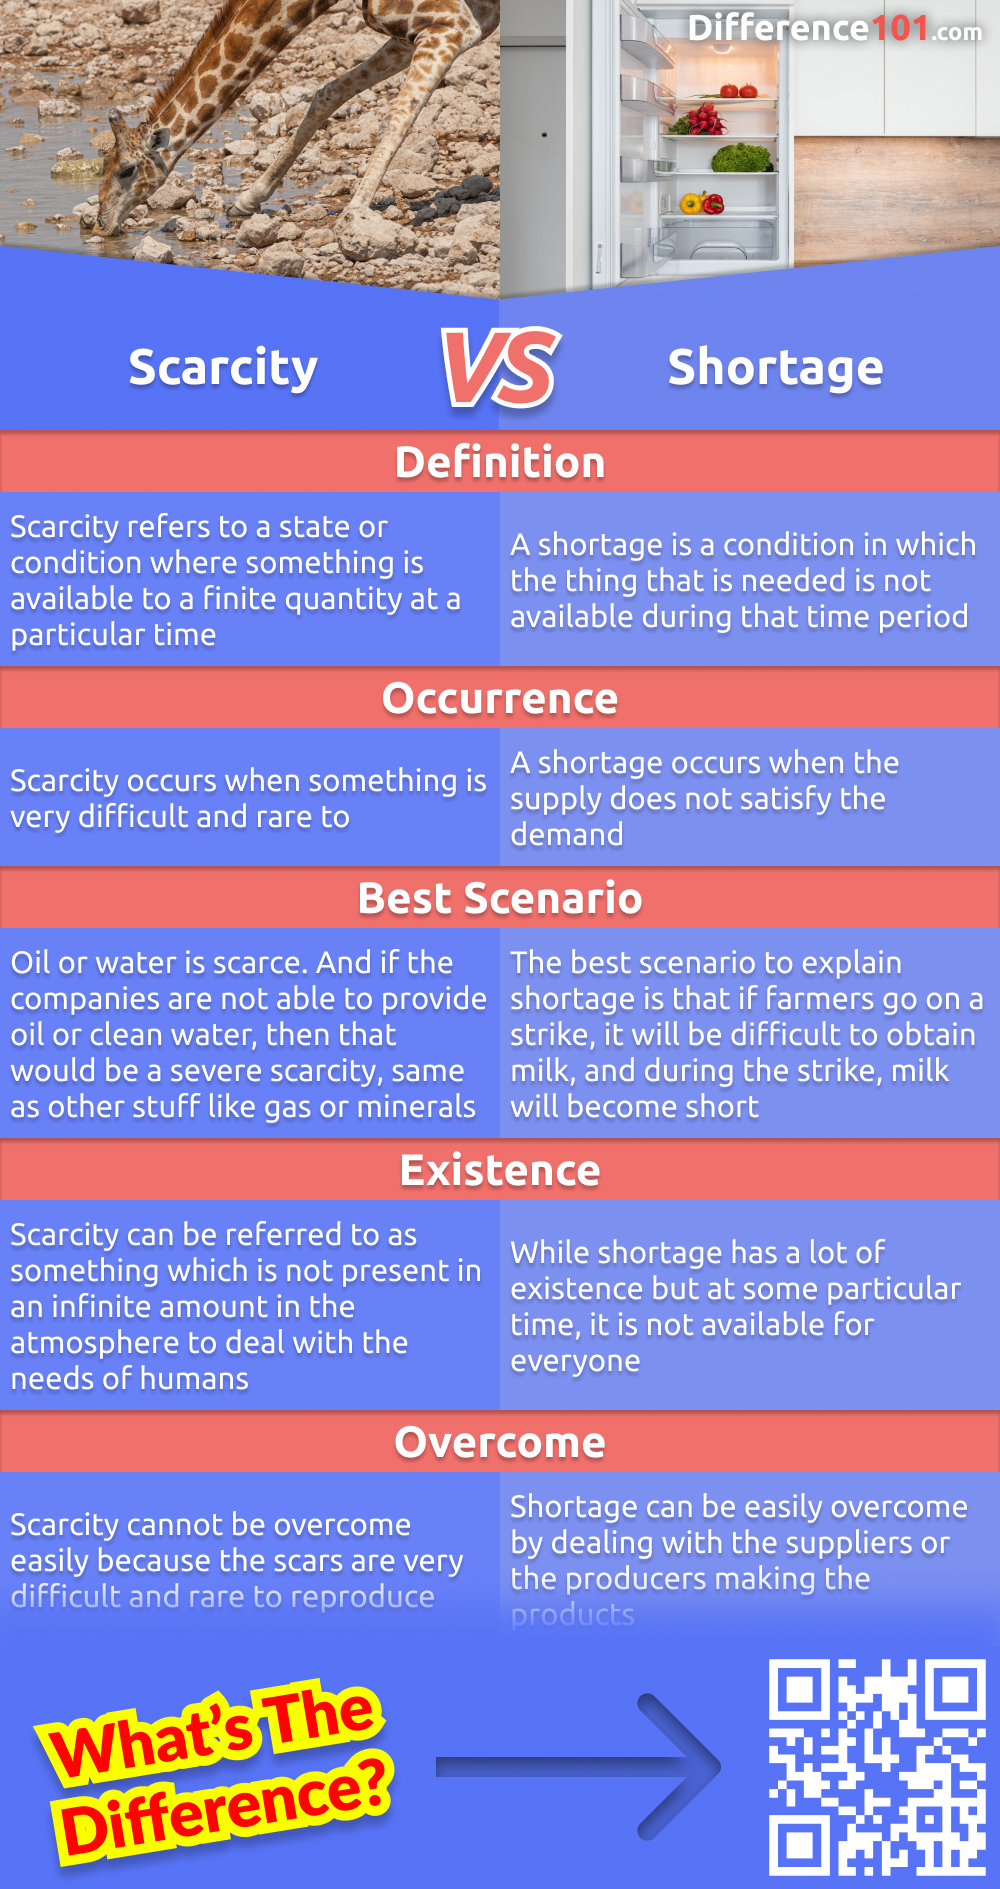 What is the difference between scarcity and shortage? This article will explain the differences between scarcity and shortage, and offer some examples, pros and cons for each. Read on to learn more.